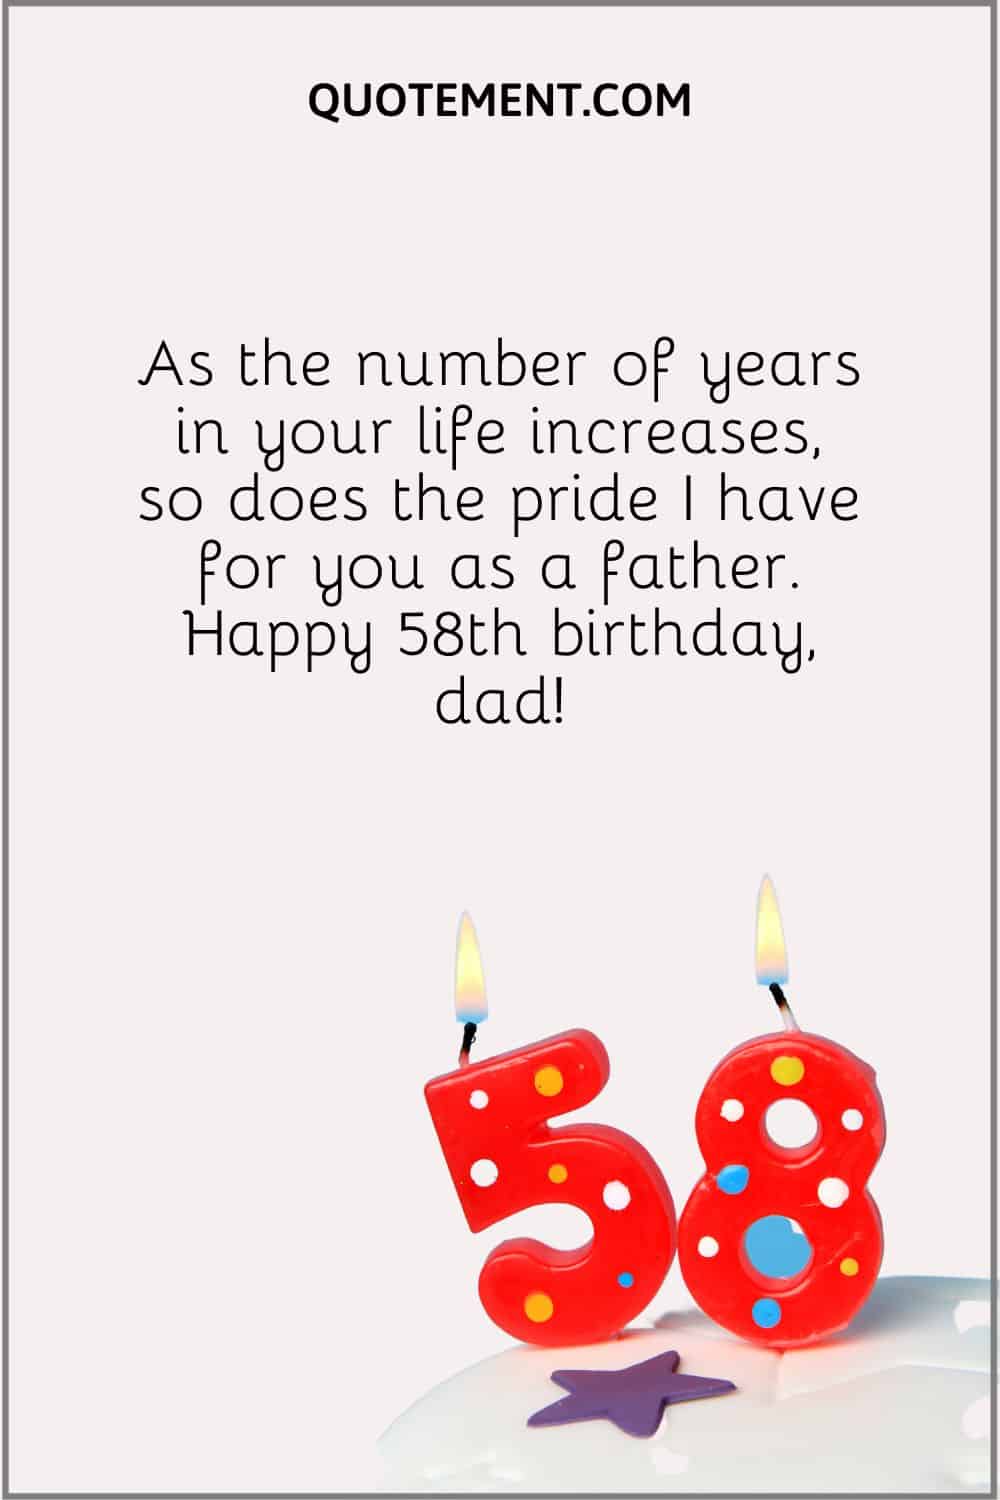 “As the number of years in your life increases, so does the pride I have for you as a father. Happy 58th birthday, dad!”